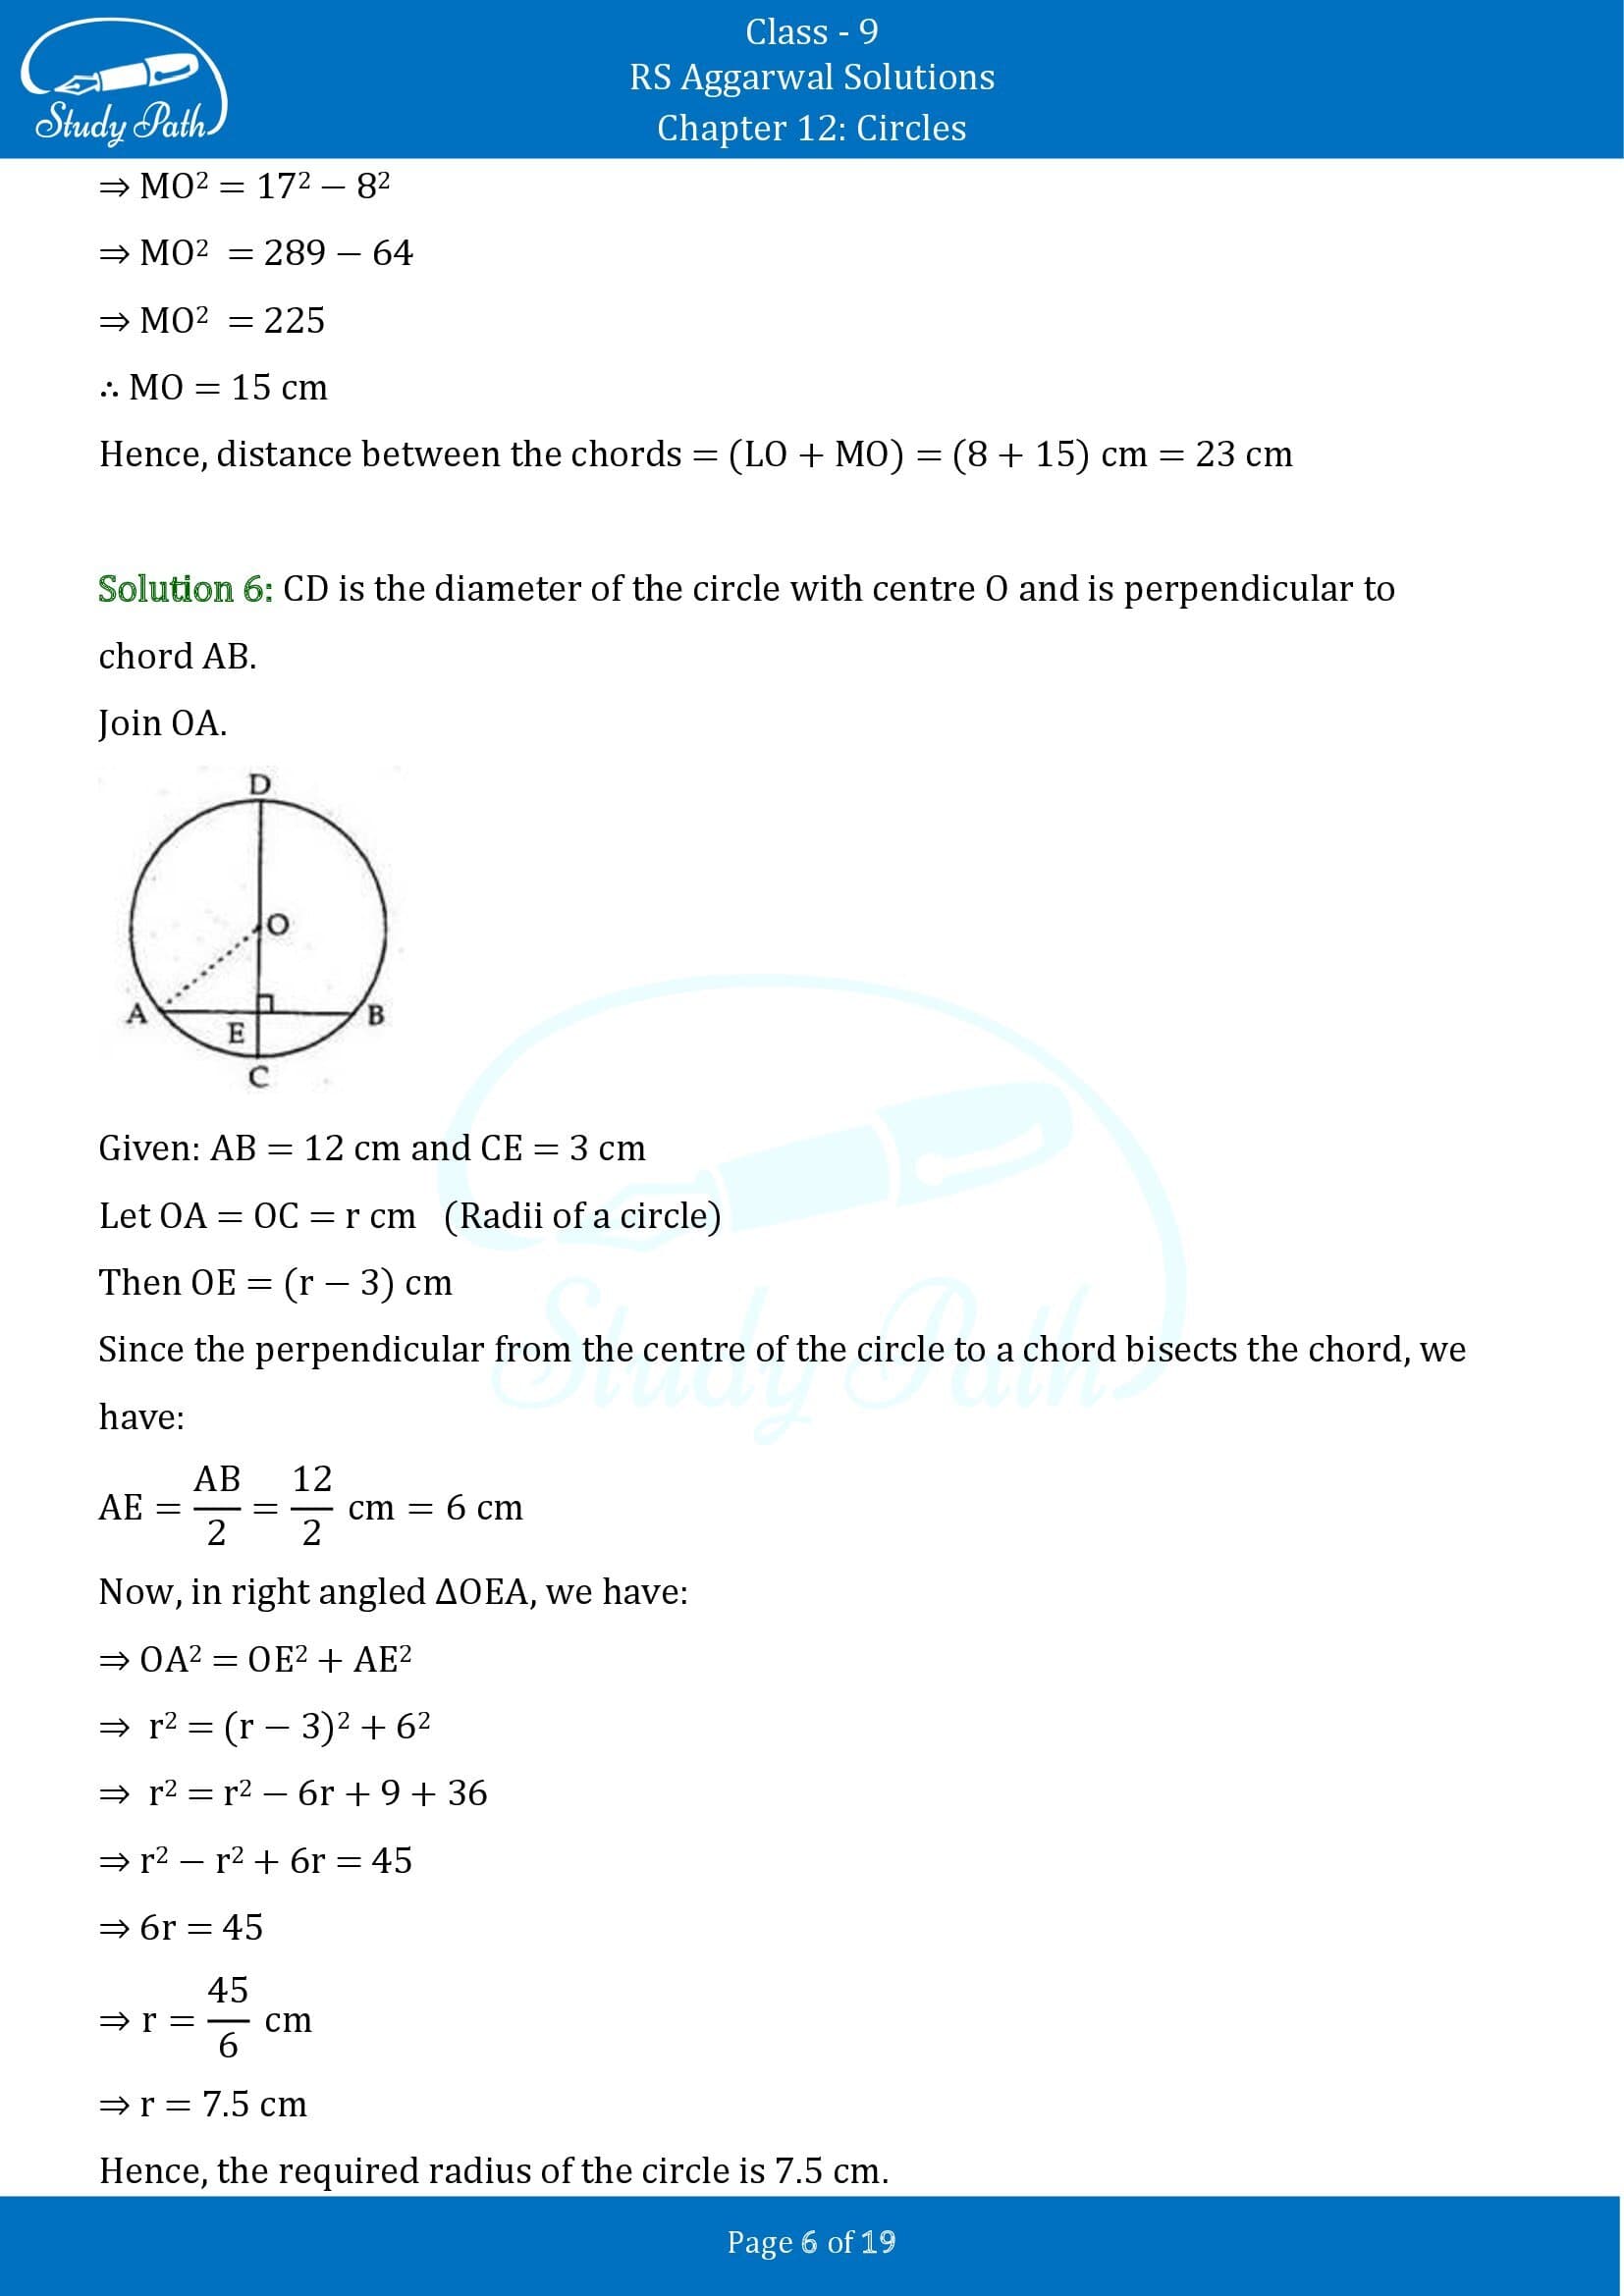 RS Aggarwal Solutions Class 9 Chapter 12 Circles Exercise 12A 00006